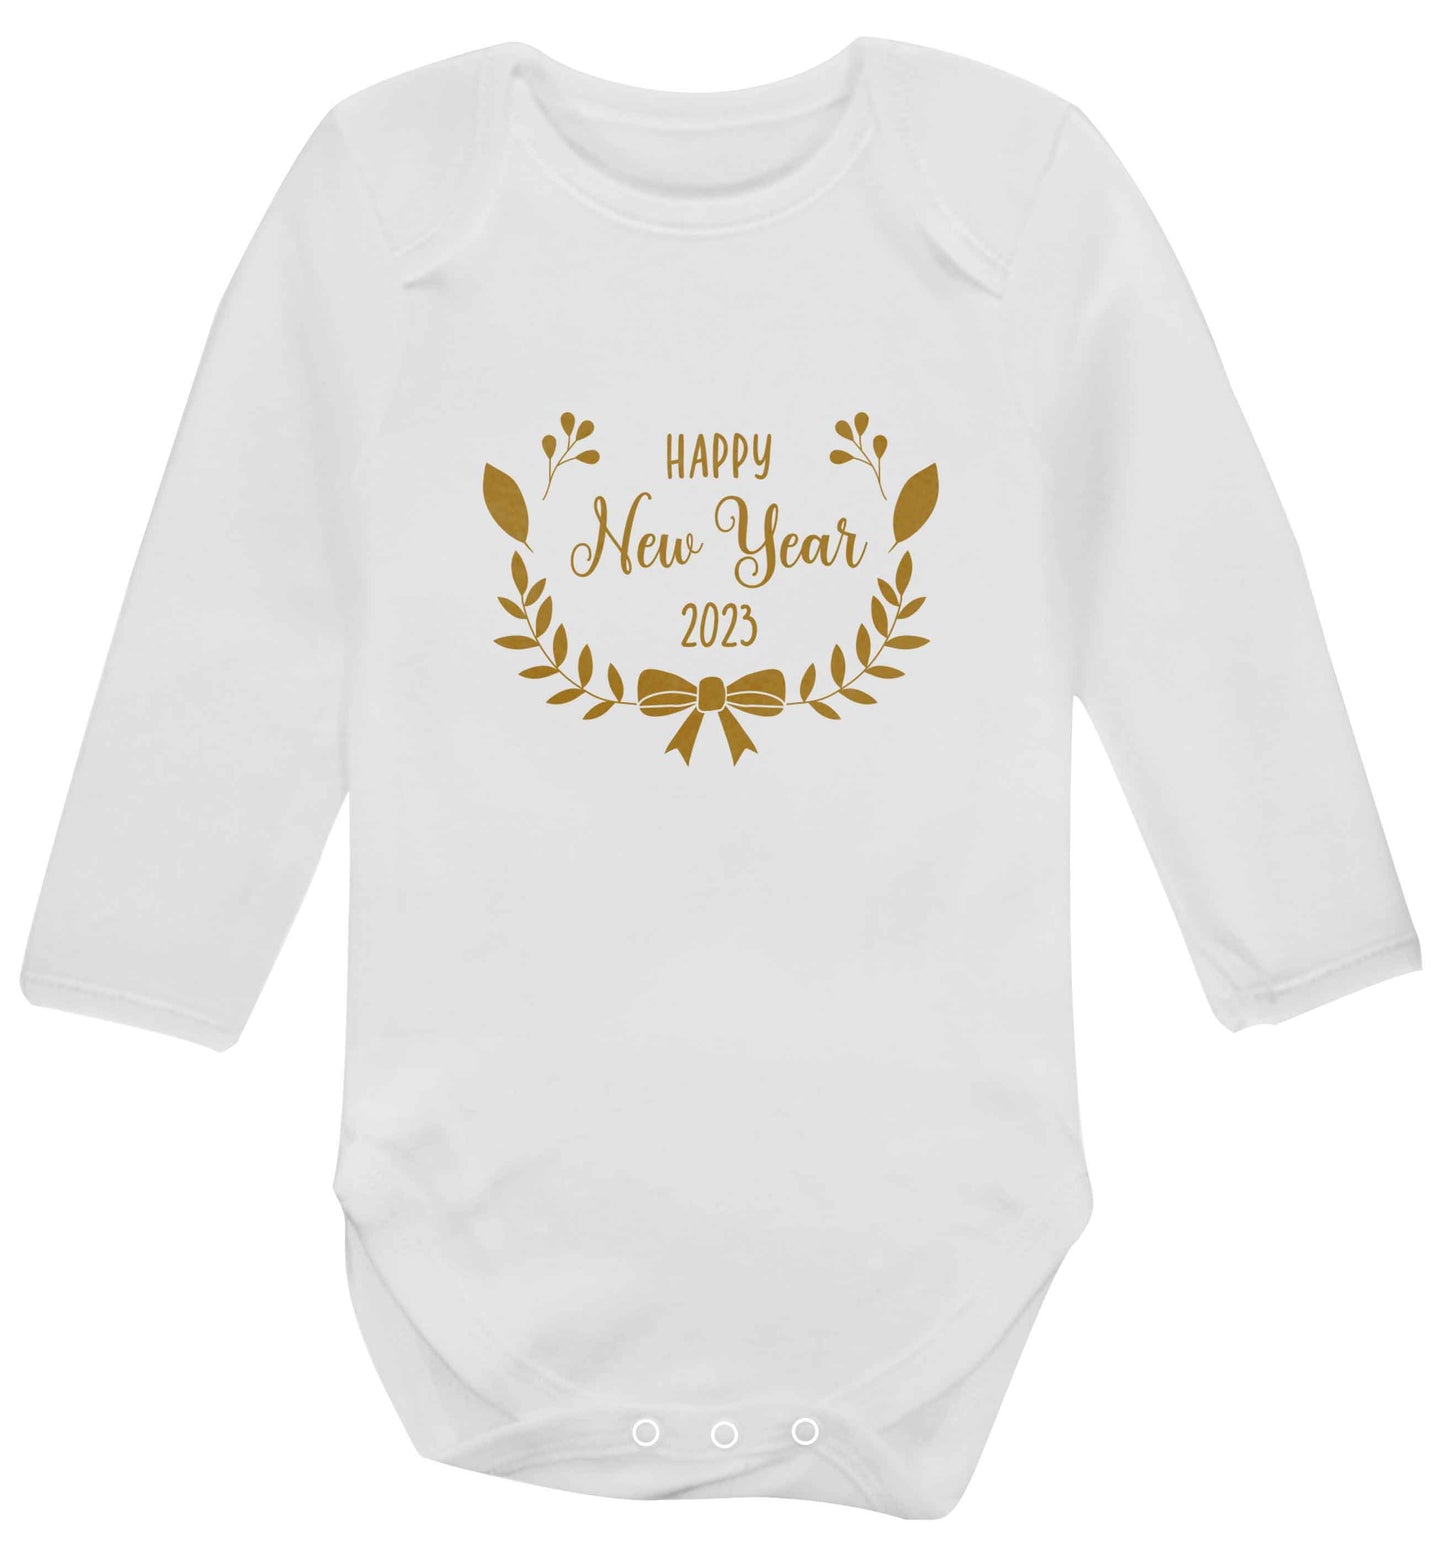 Happy New Year 2023 baby vest long sleeved white 6-12 months